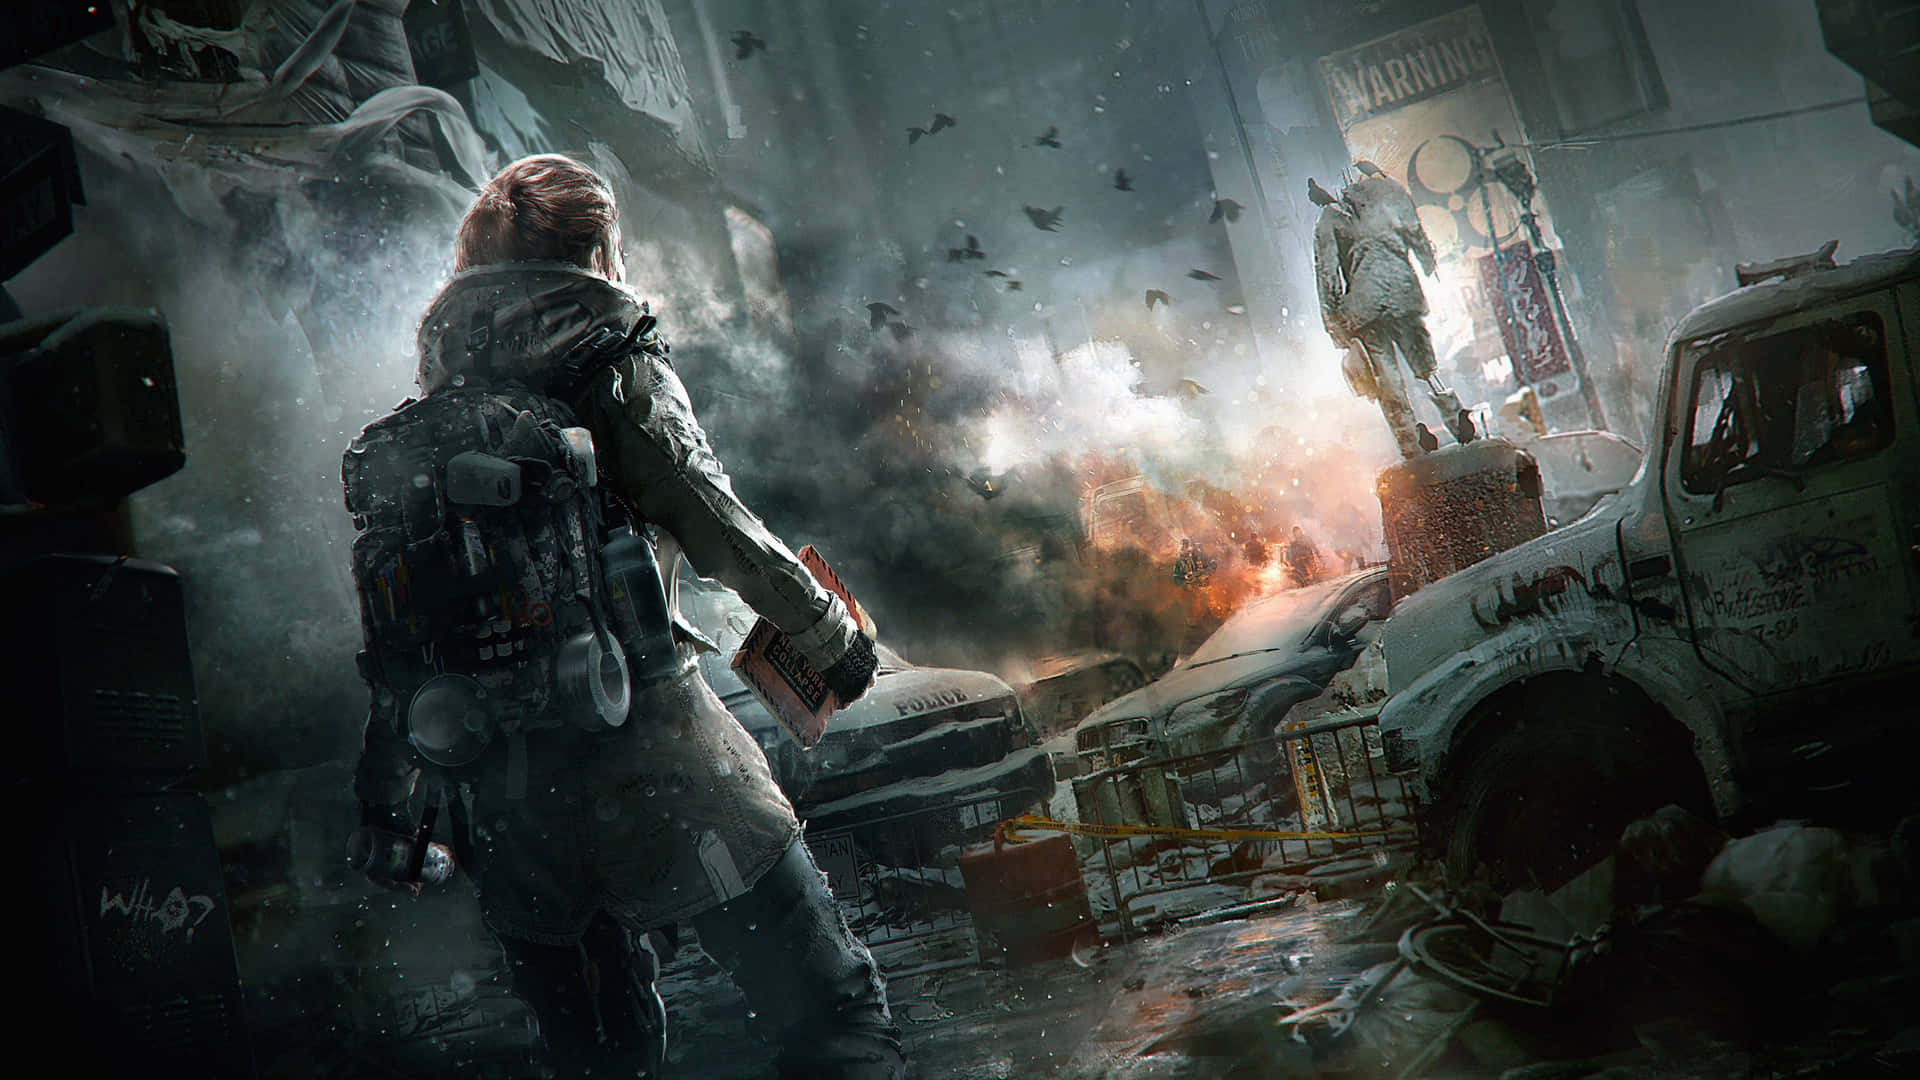 "Explore a dystopian New York guided by The Division." Wallpaper